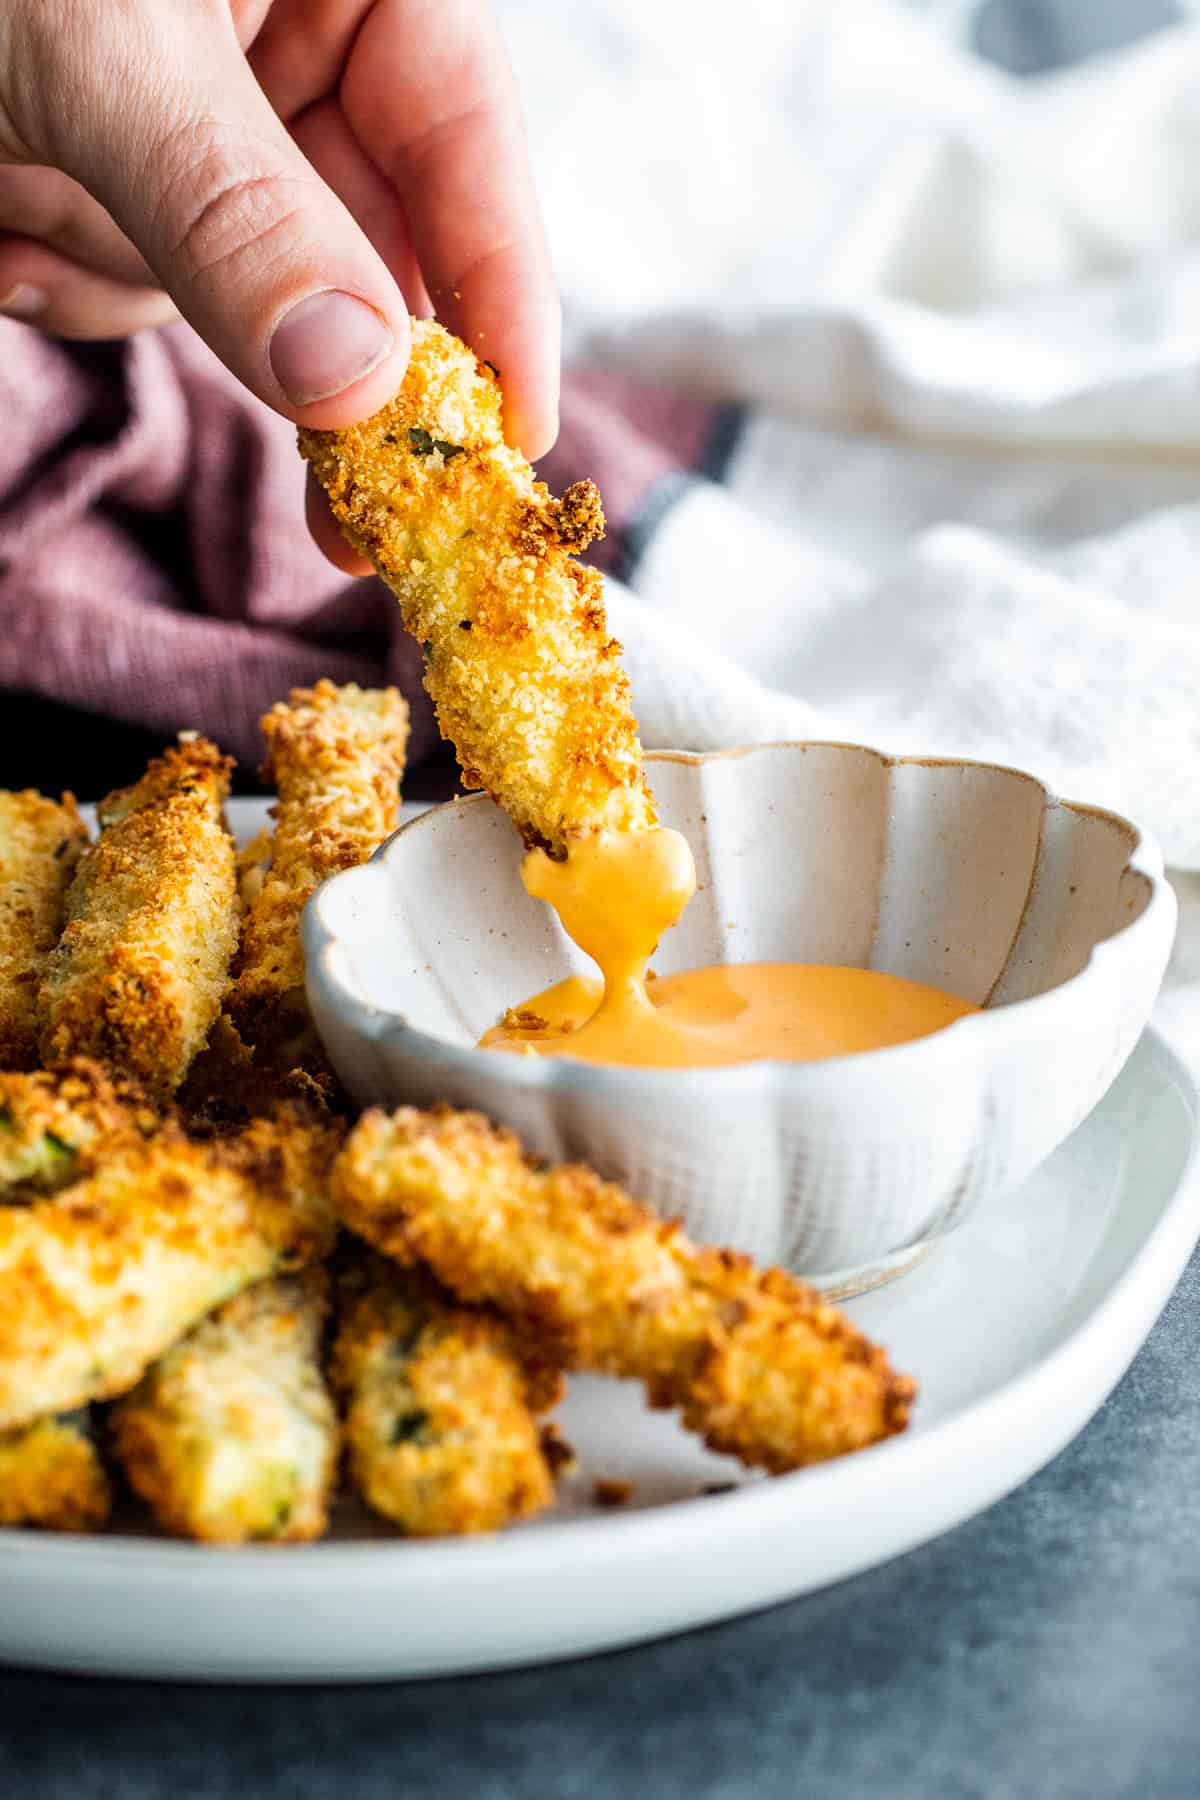 Hand dipping fried zucchini into a small white bowl of sauce.